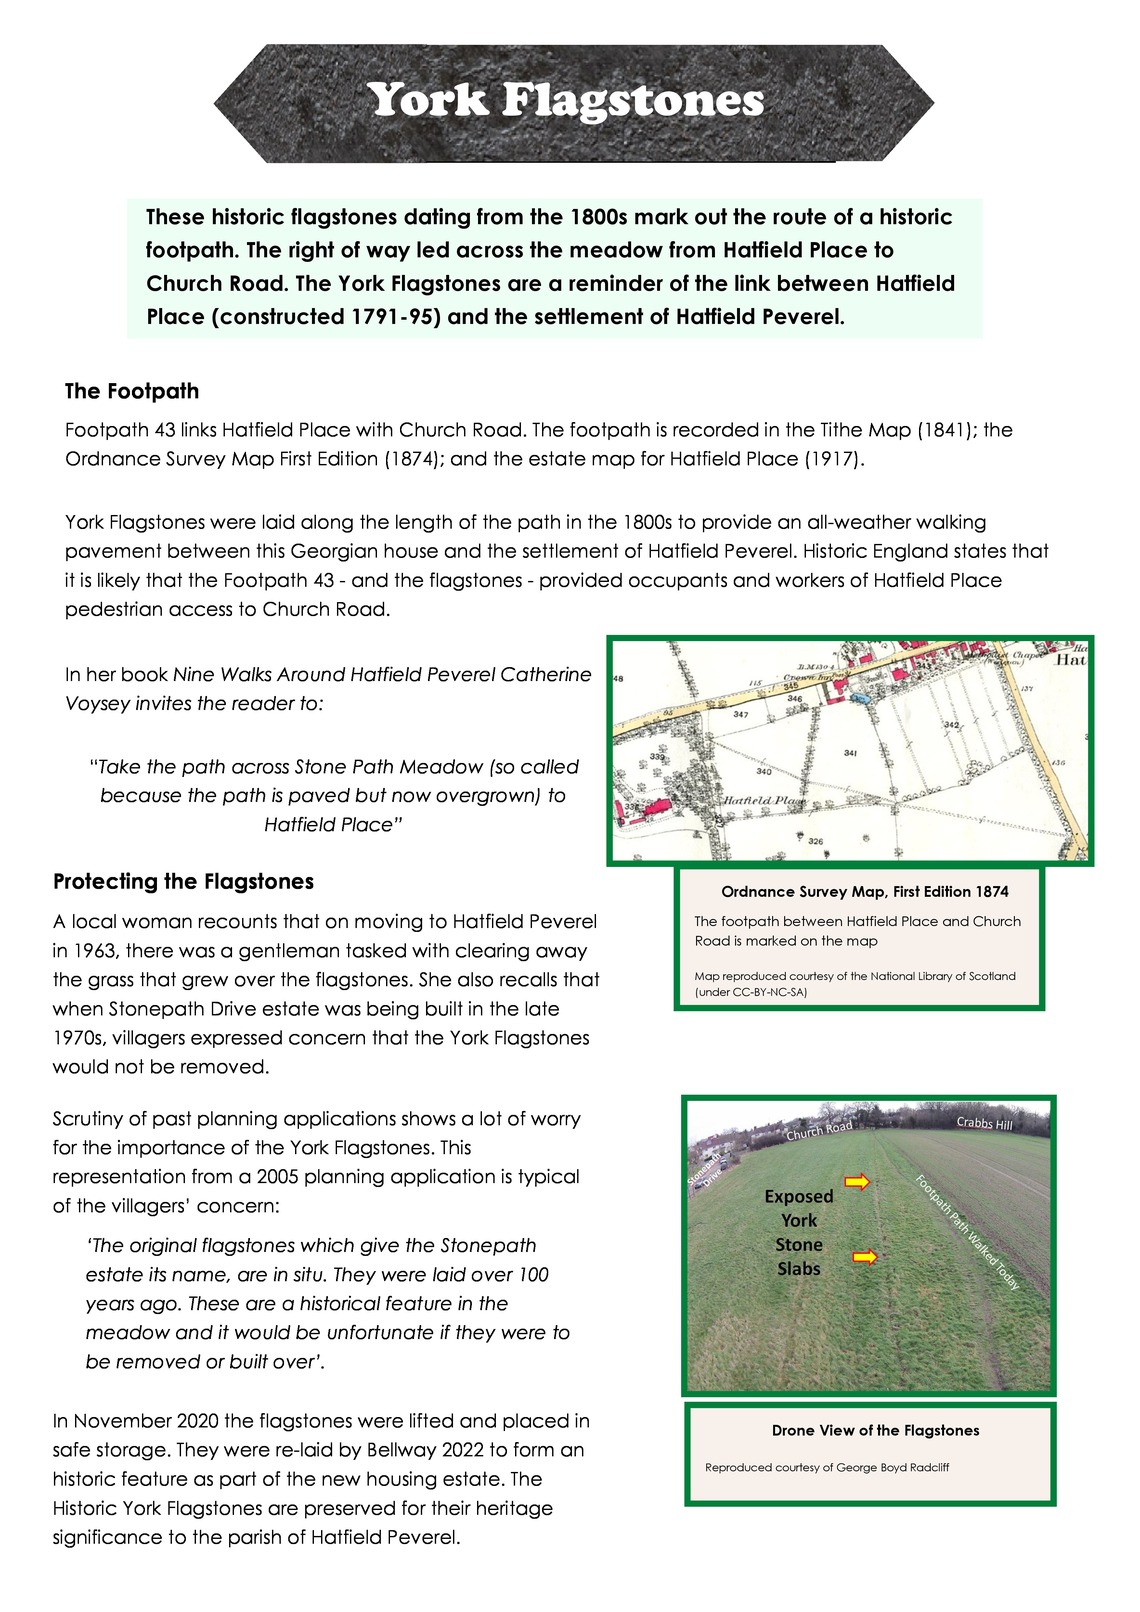 Image of the information on the flagstone path - also available in PDF by clicking the link below the image